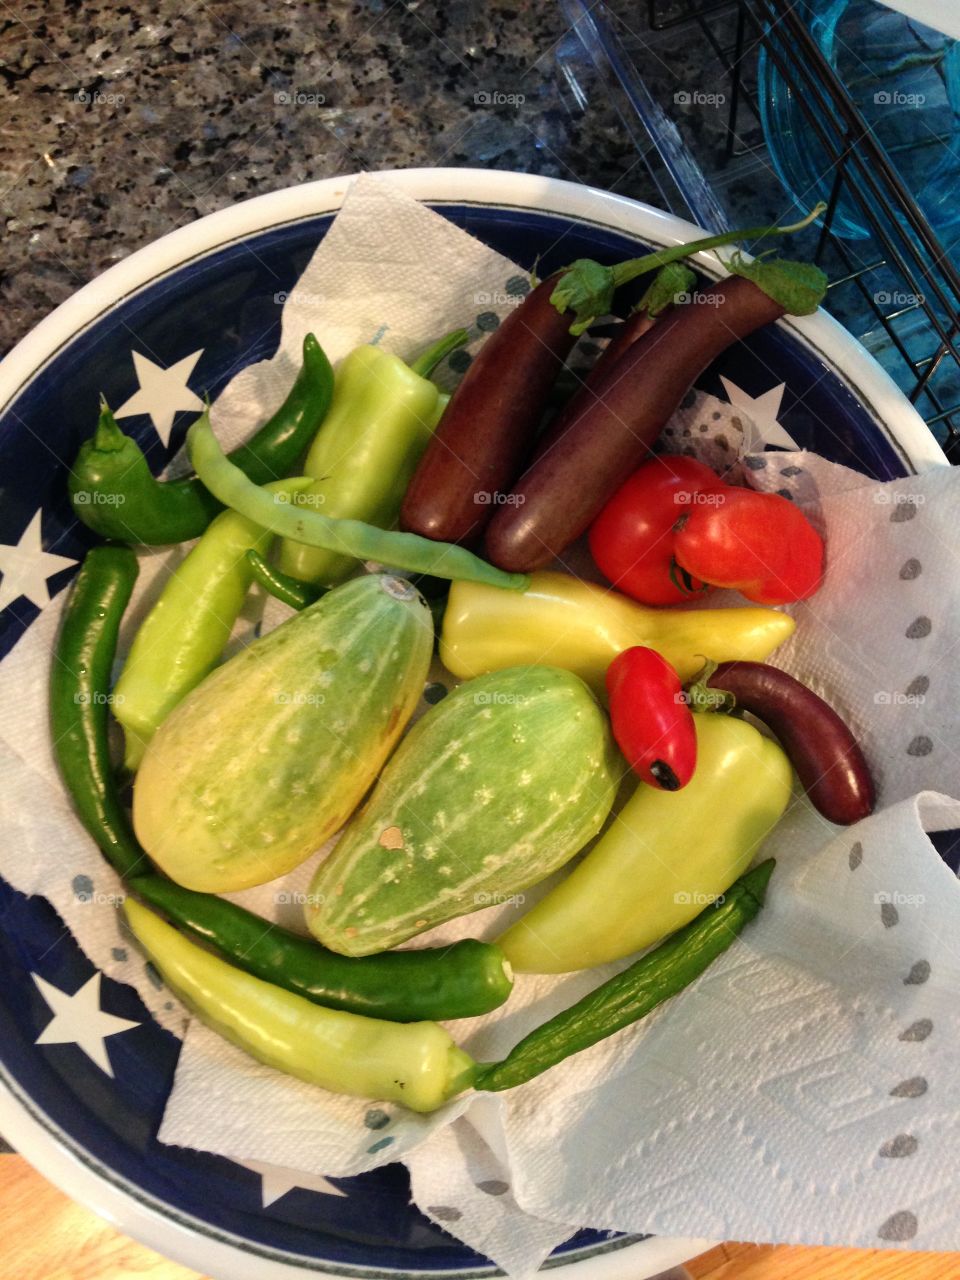 Home grown goodness.